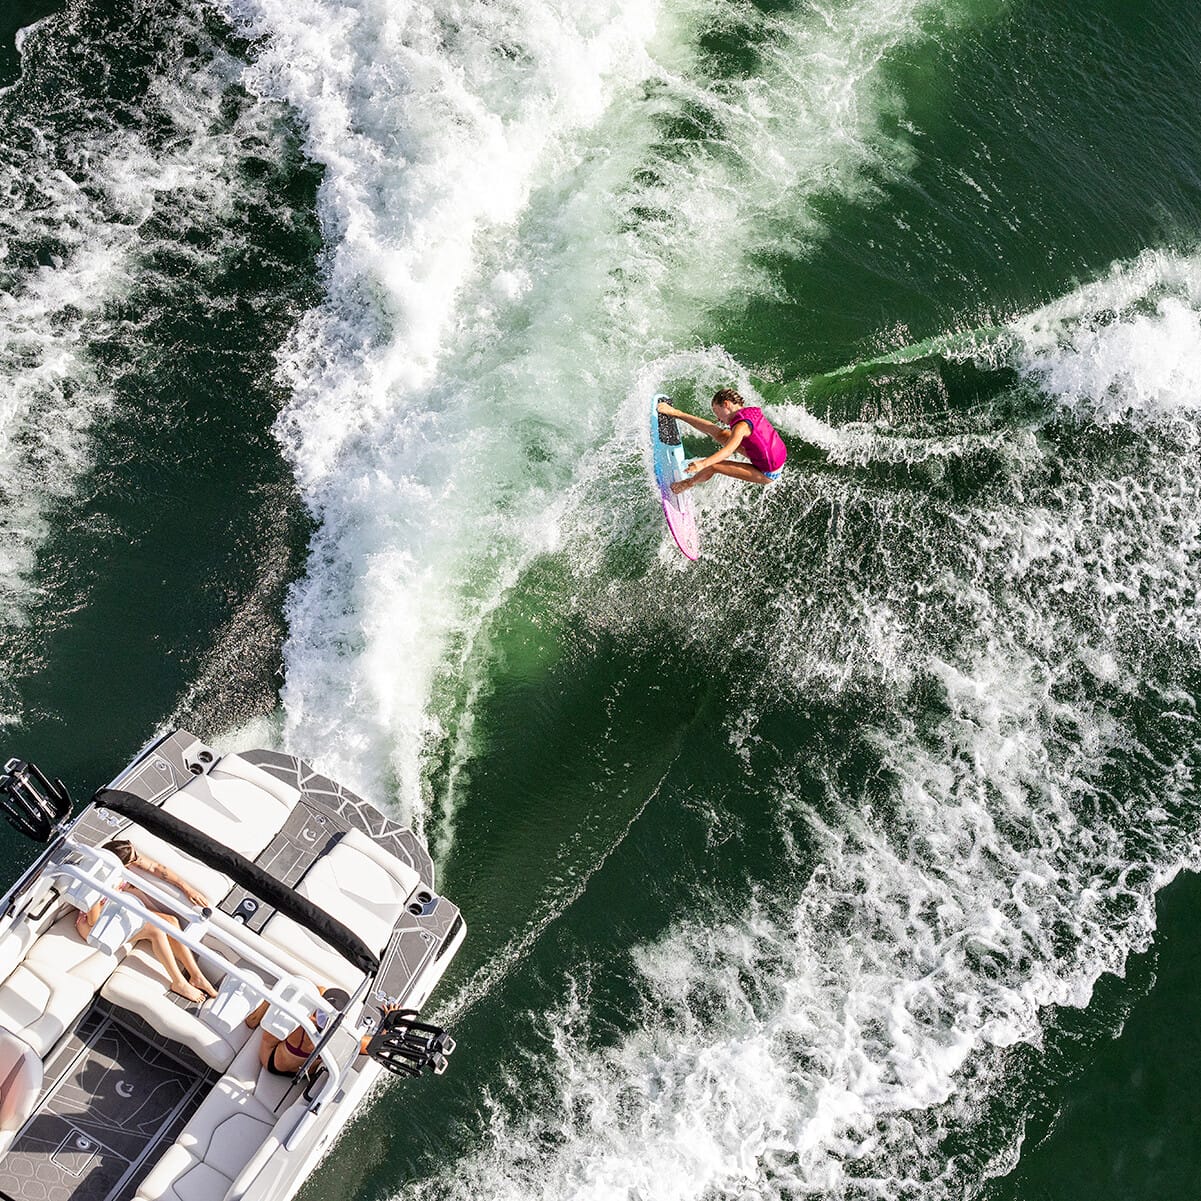 A person surfs on a wakeboard behind a motorboat on a lake, creating splash and waves, while three people relax on the boat.